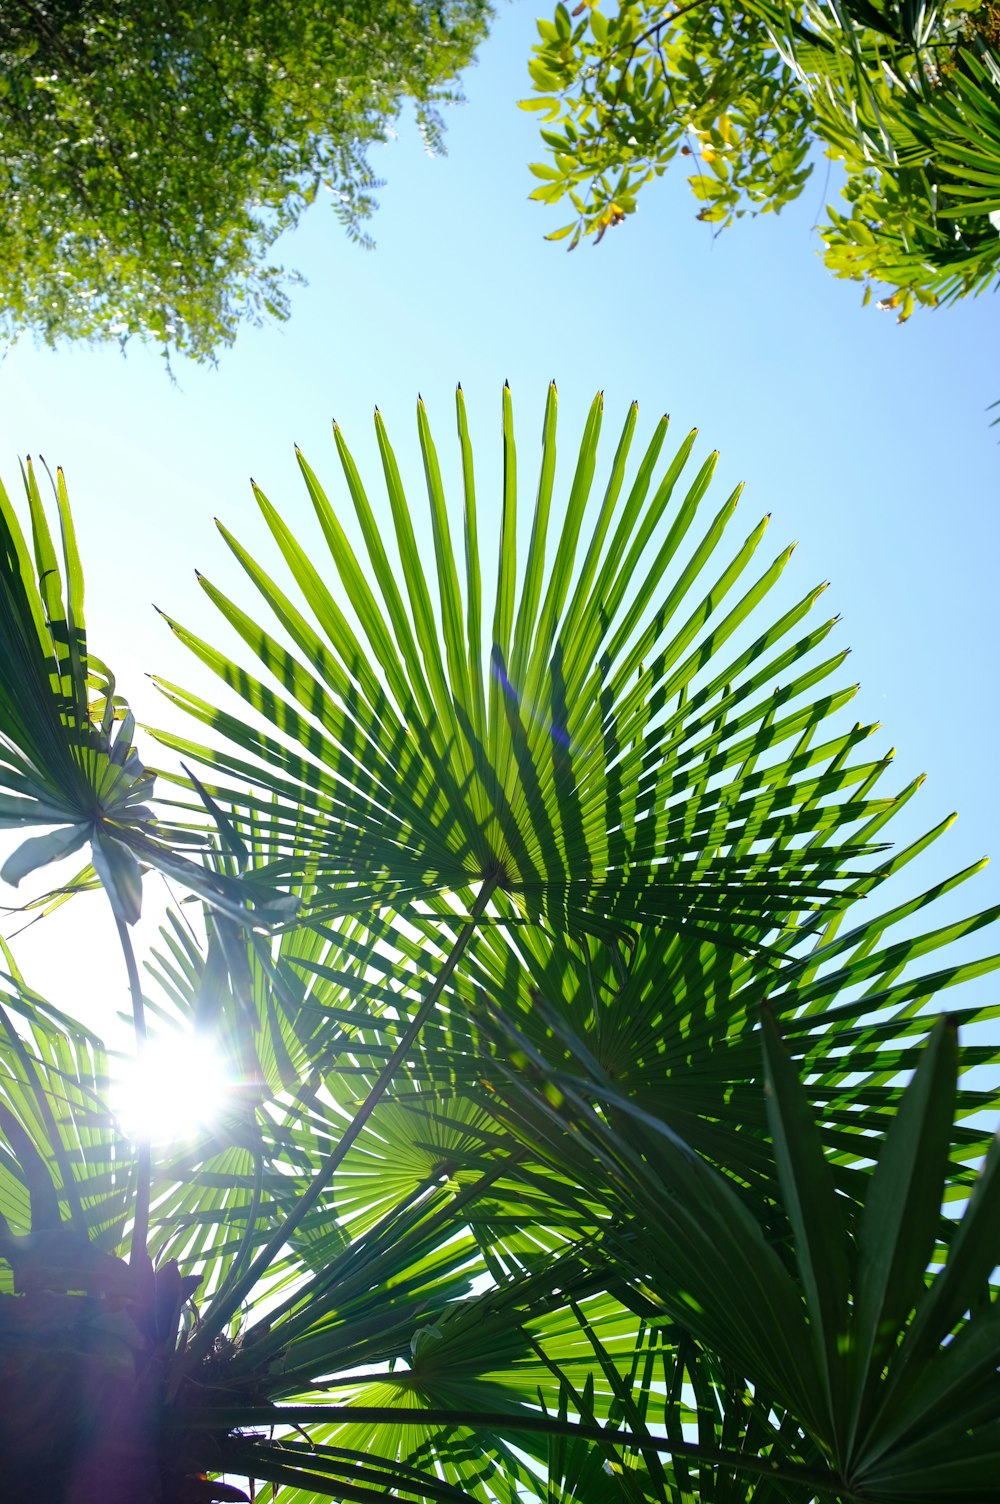 the sun shines through the leaves of a palm tree